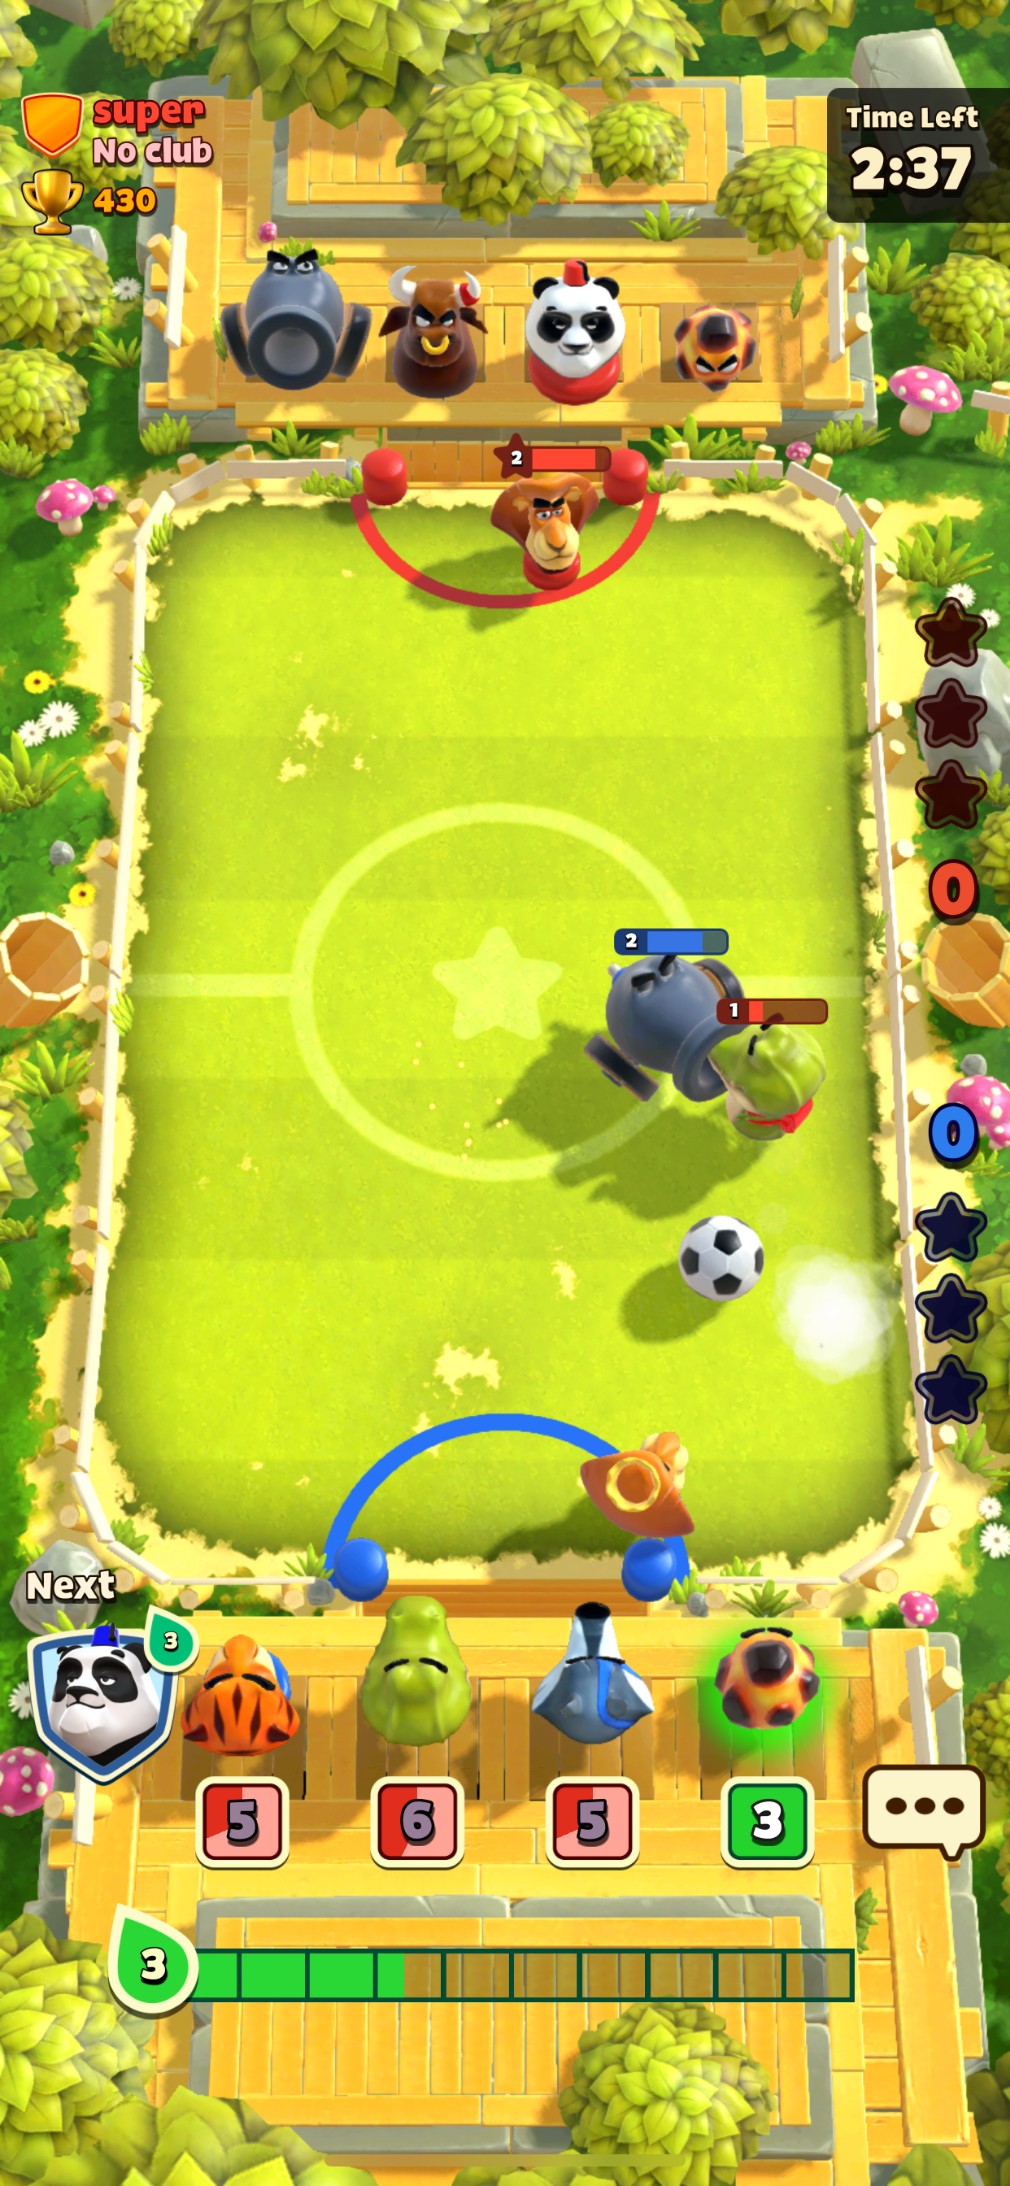 Rumble Stars Soccer iOS screenshot - Playing at the start of a match